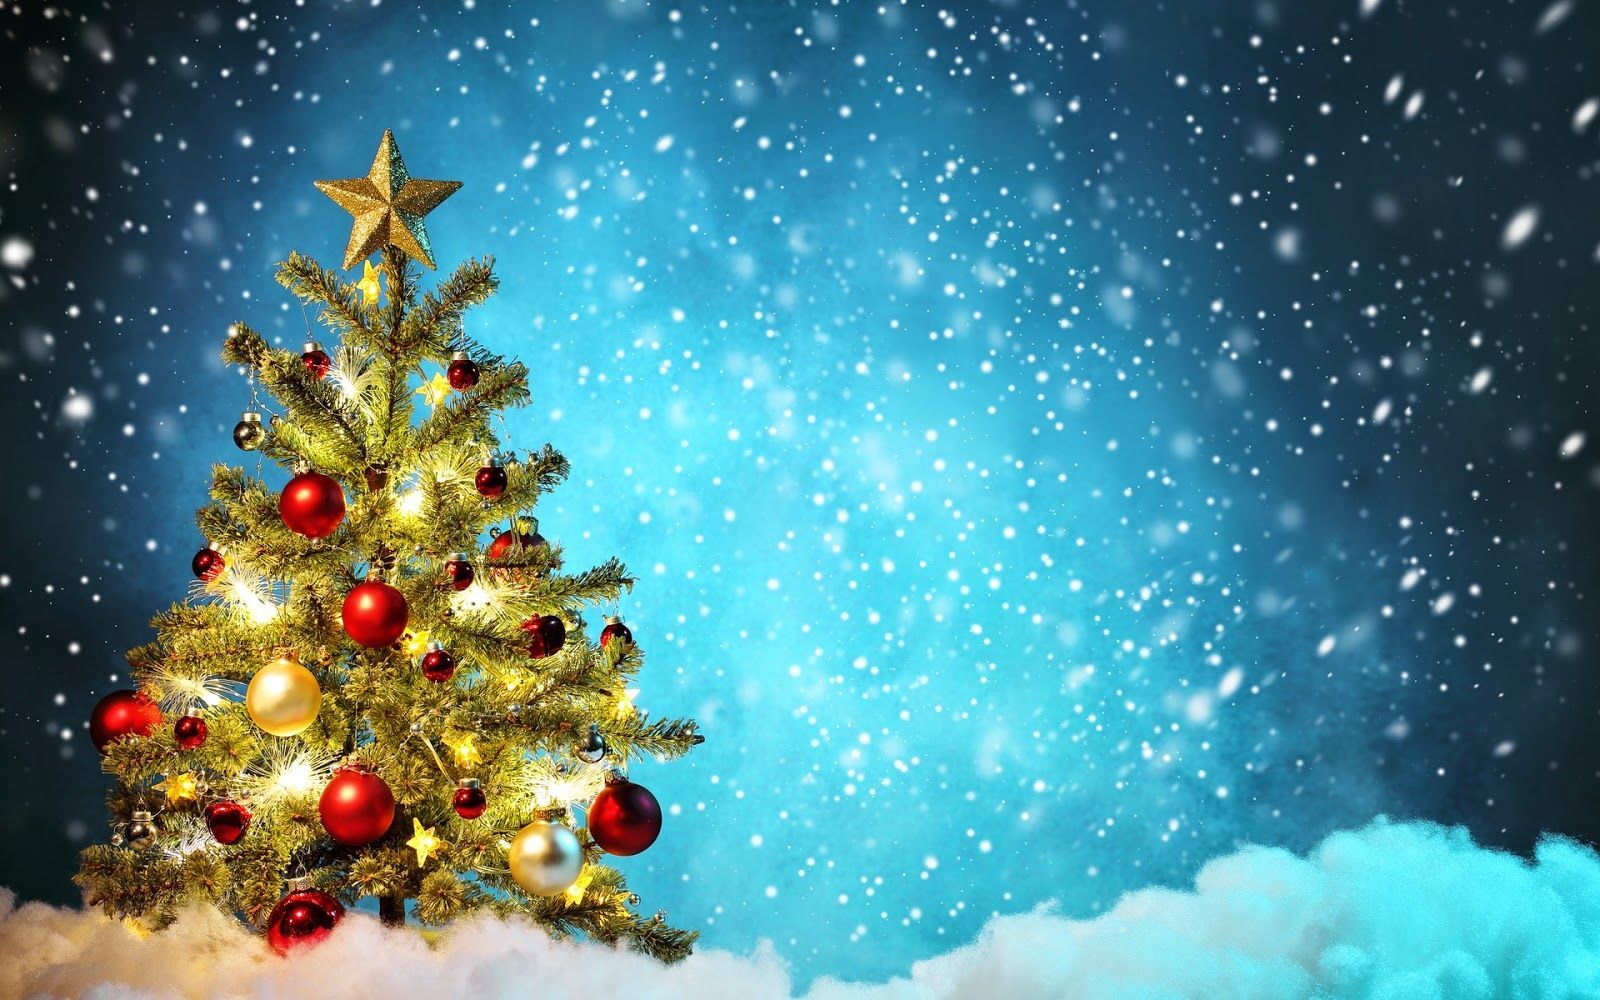 Merry Christmas Picture. Christmas tree wallpaper, Christmas wallpaper free, Christmas wallpaper hd